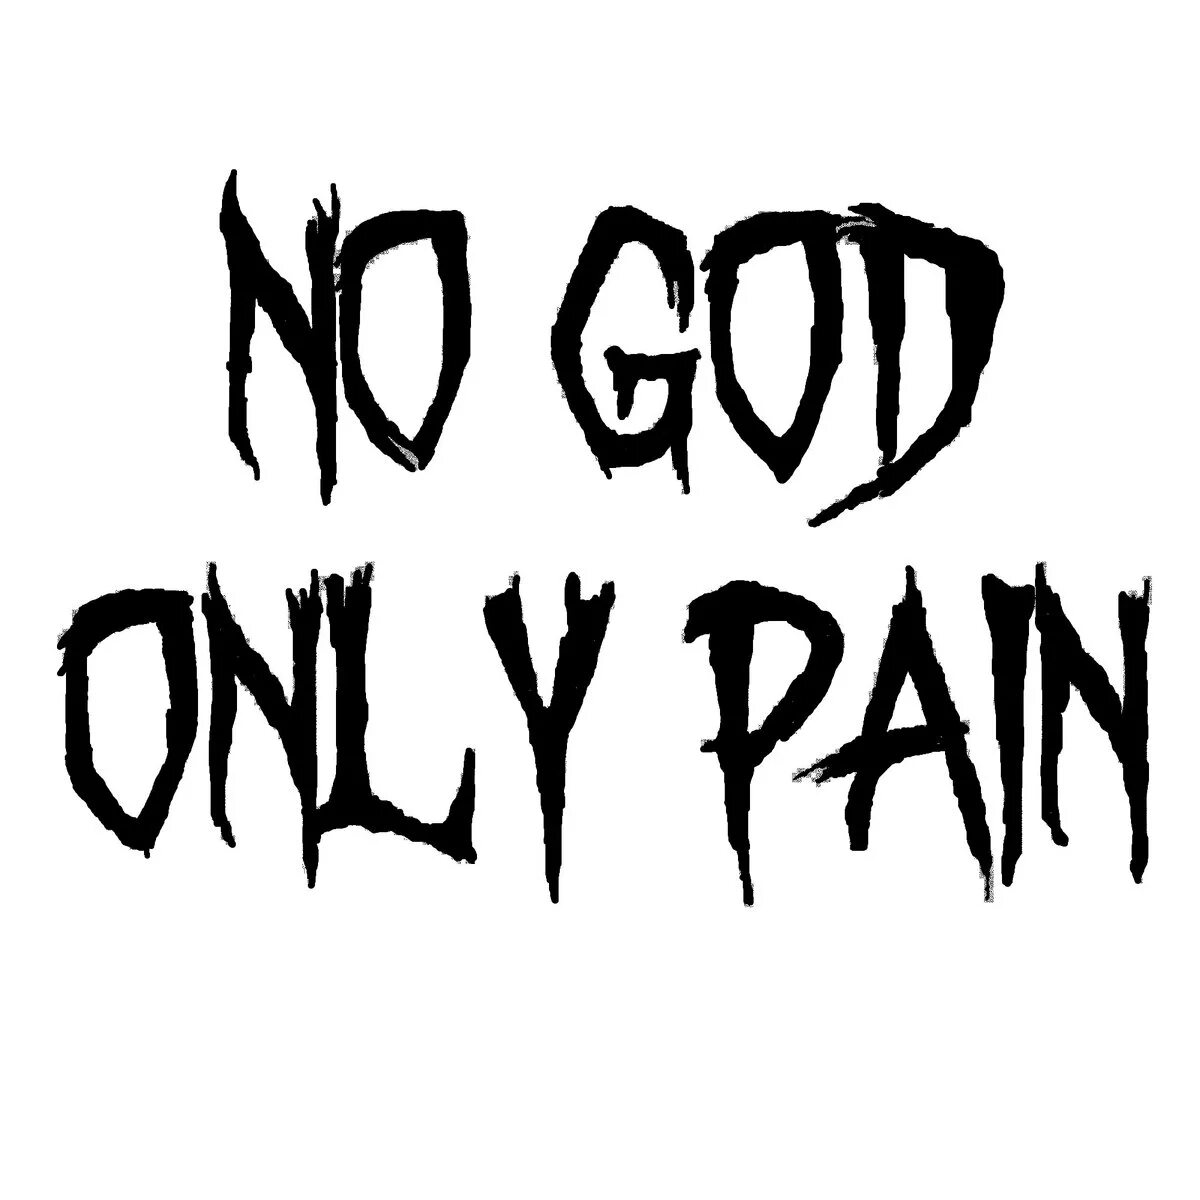 Only pain. There is no God. There is no God further. There is no God further черный фон. Gesture there is no God.